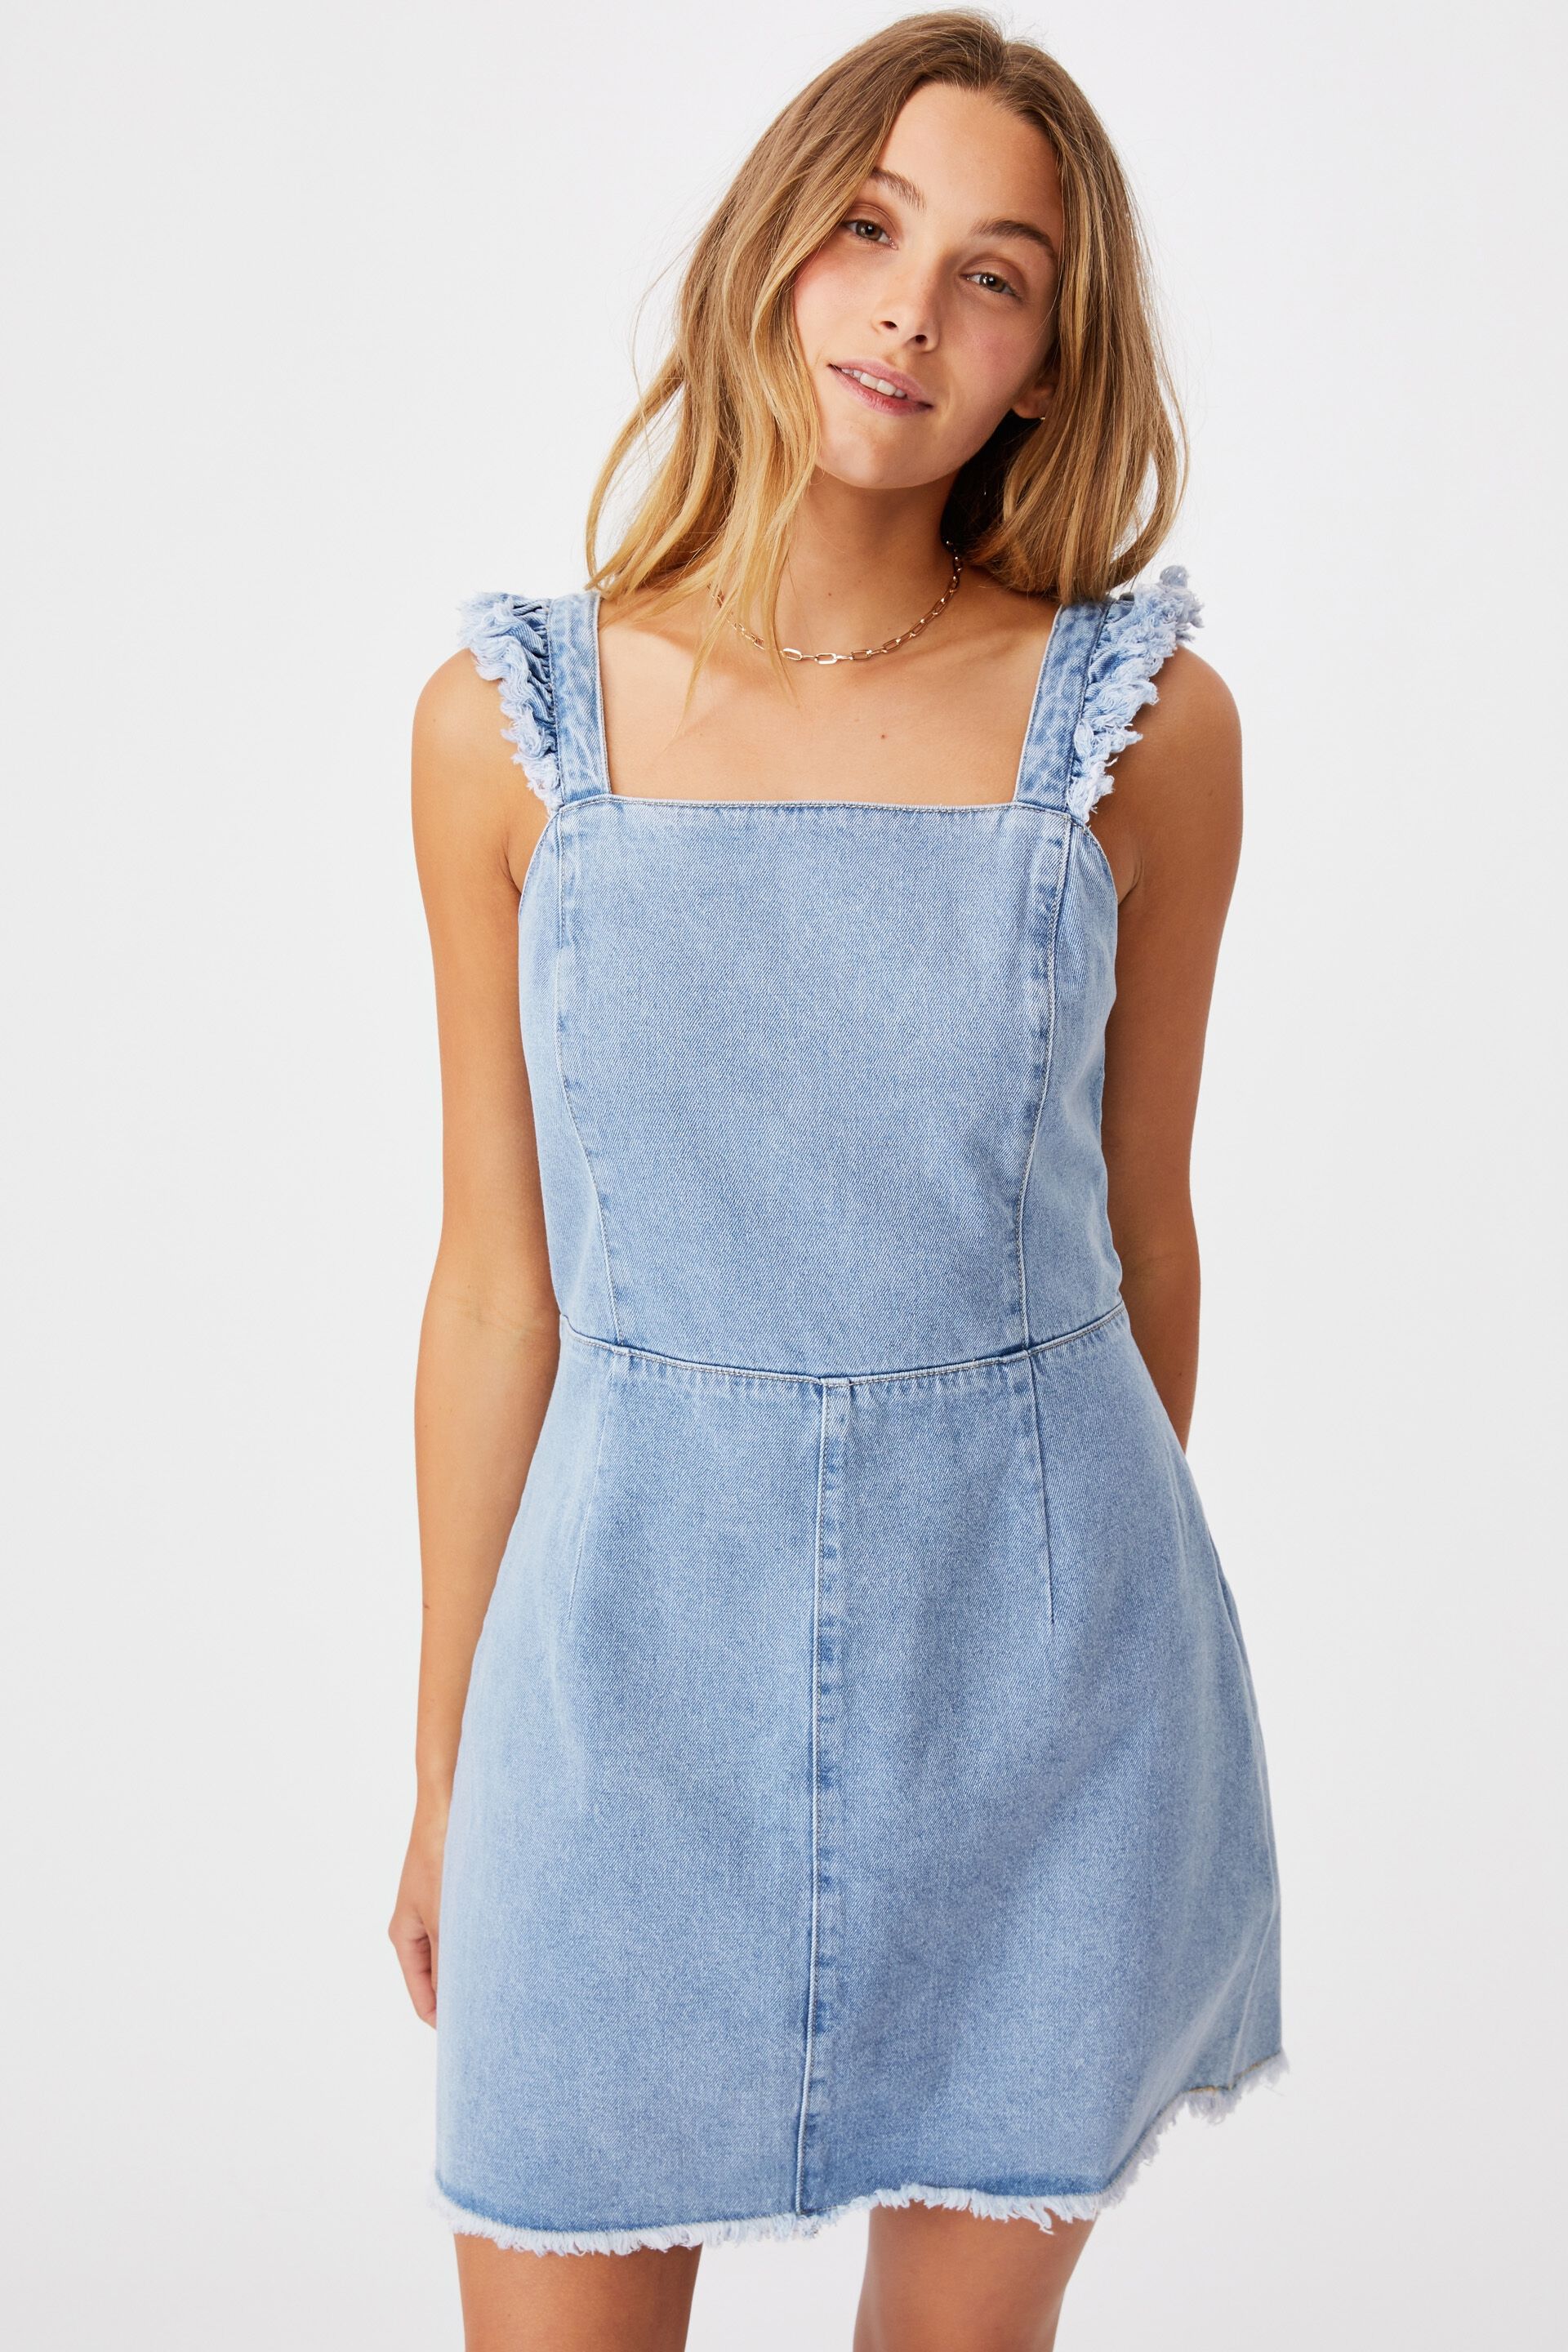 Search result for denim dress | Cotton On